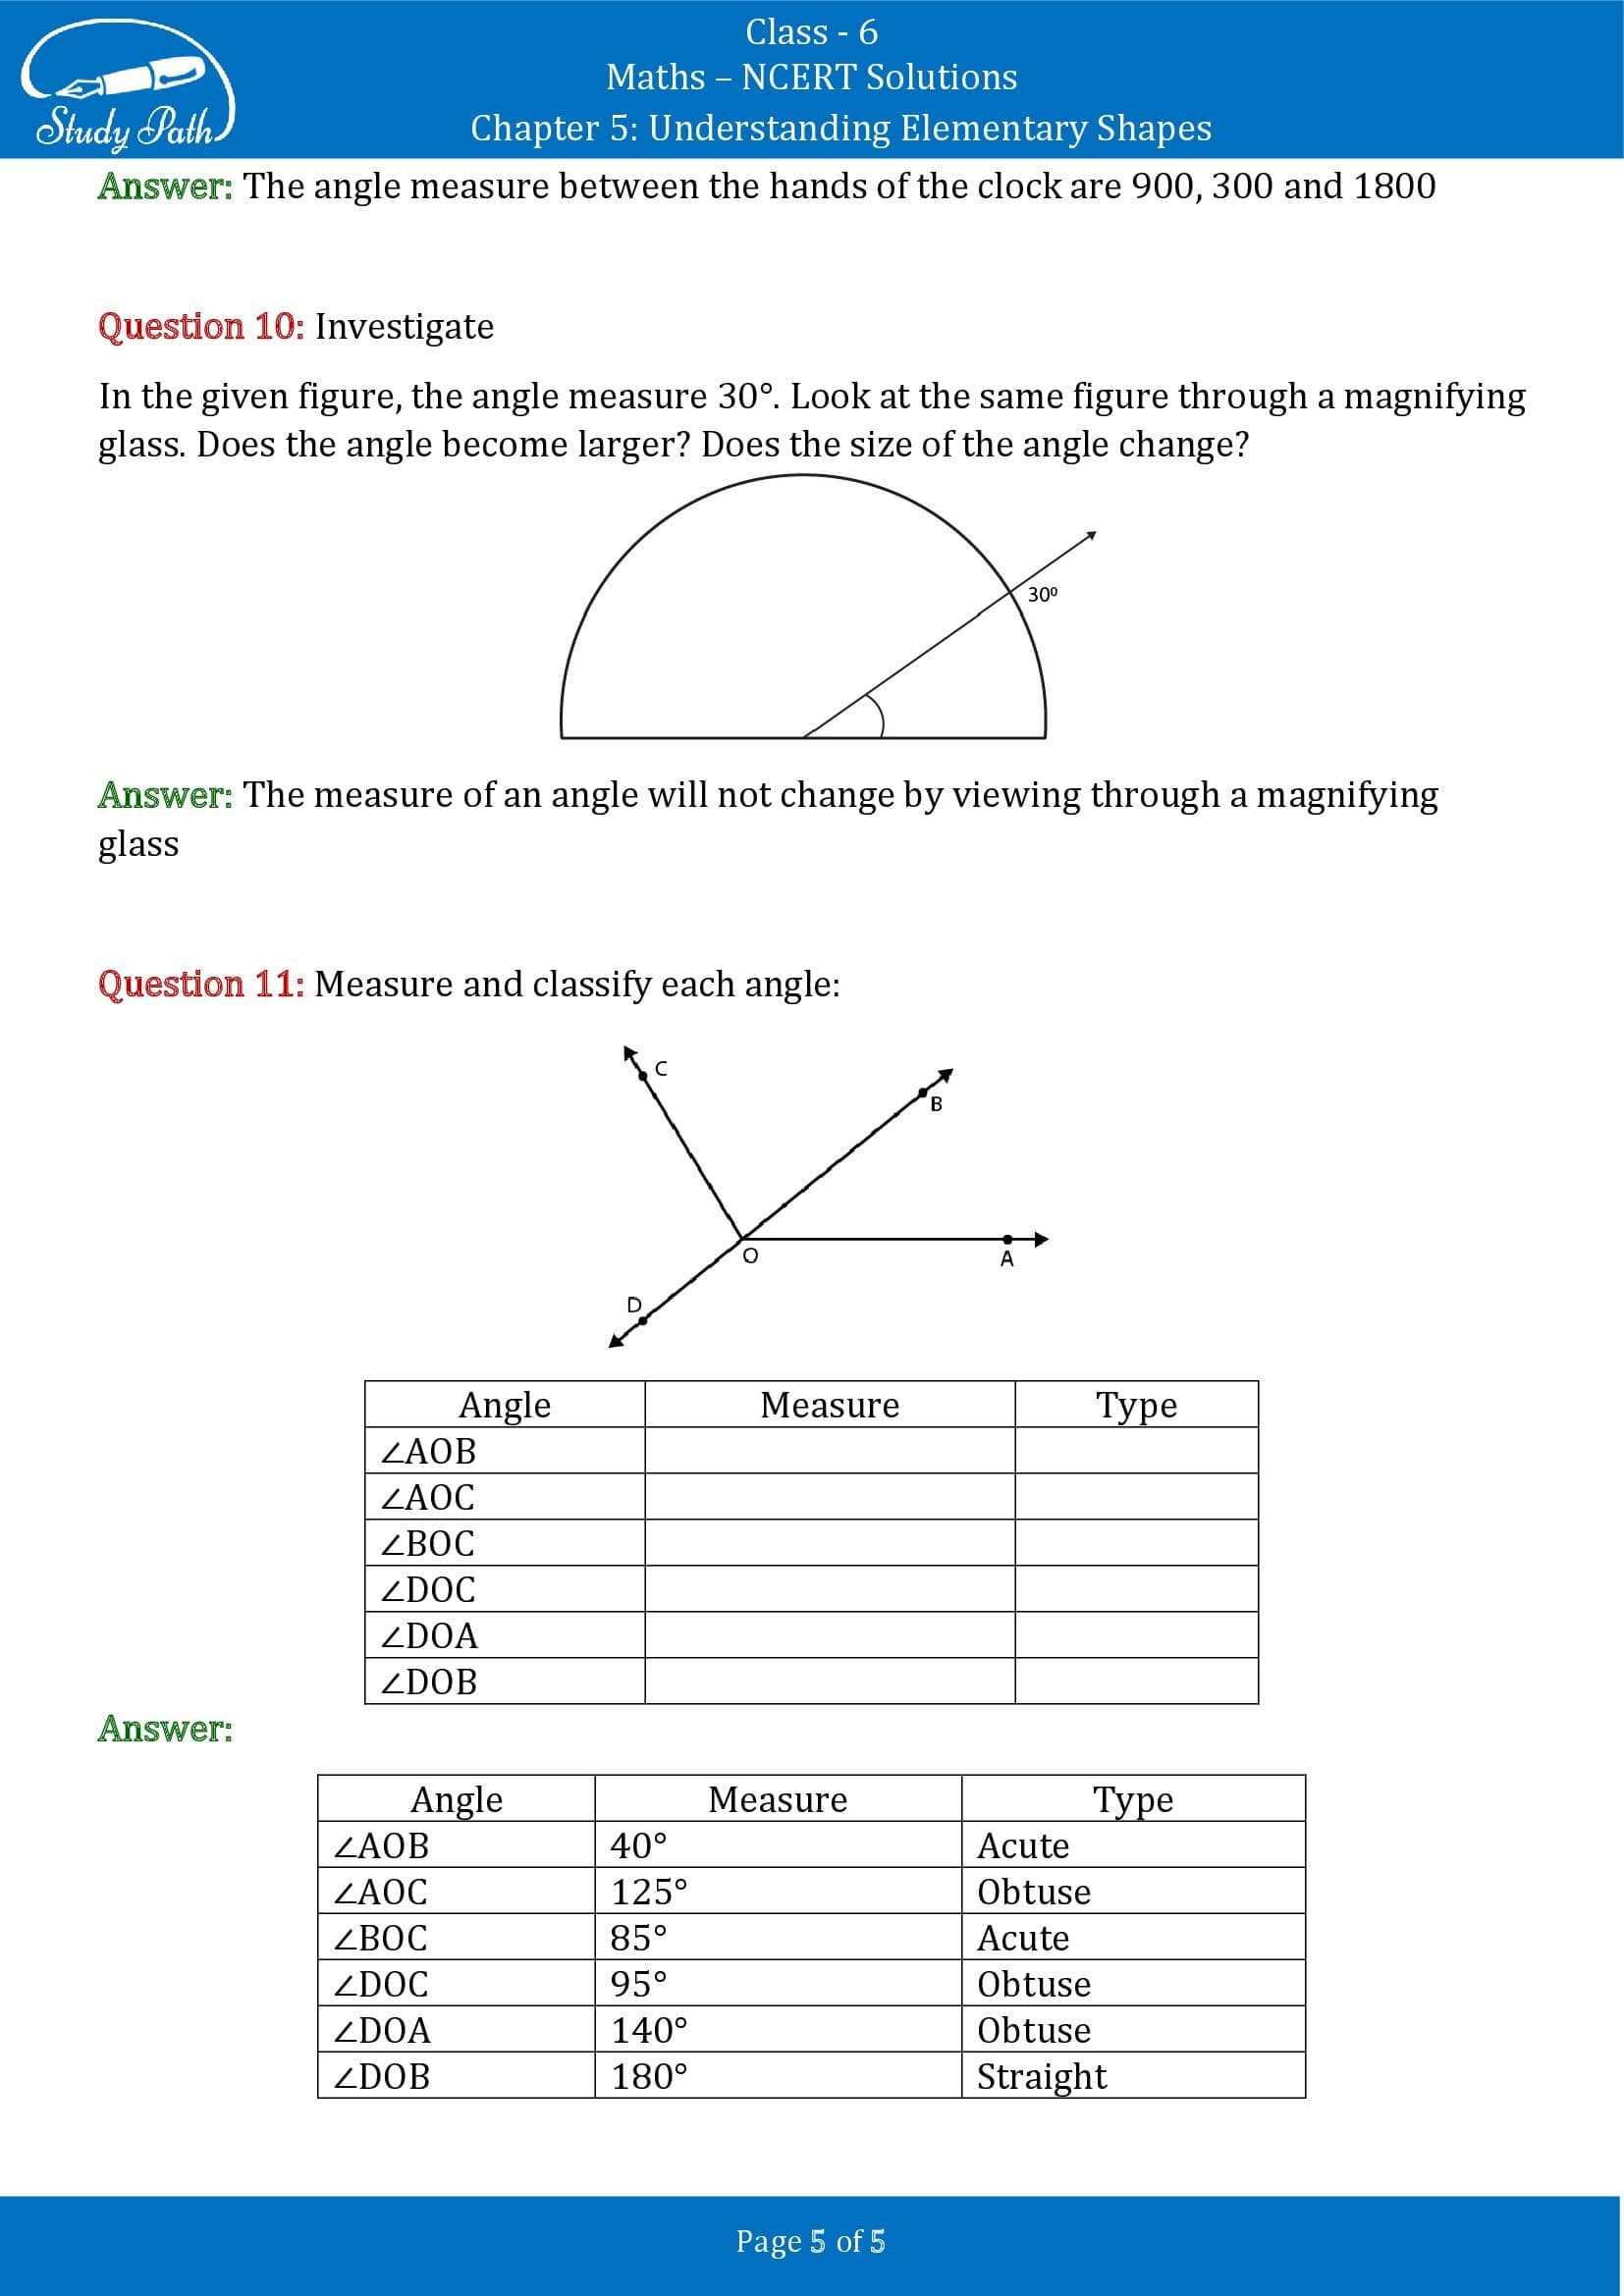 NCERT Solutions for Class 6 Maths Chapter 5 Understanding Elementary Shapes Exercise 5.4 0005